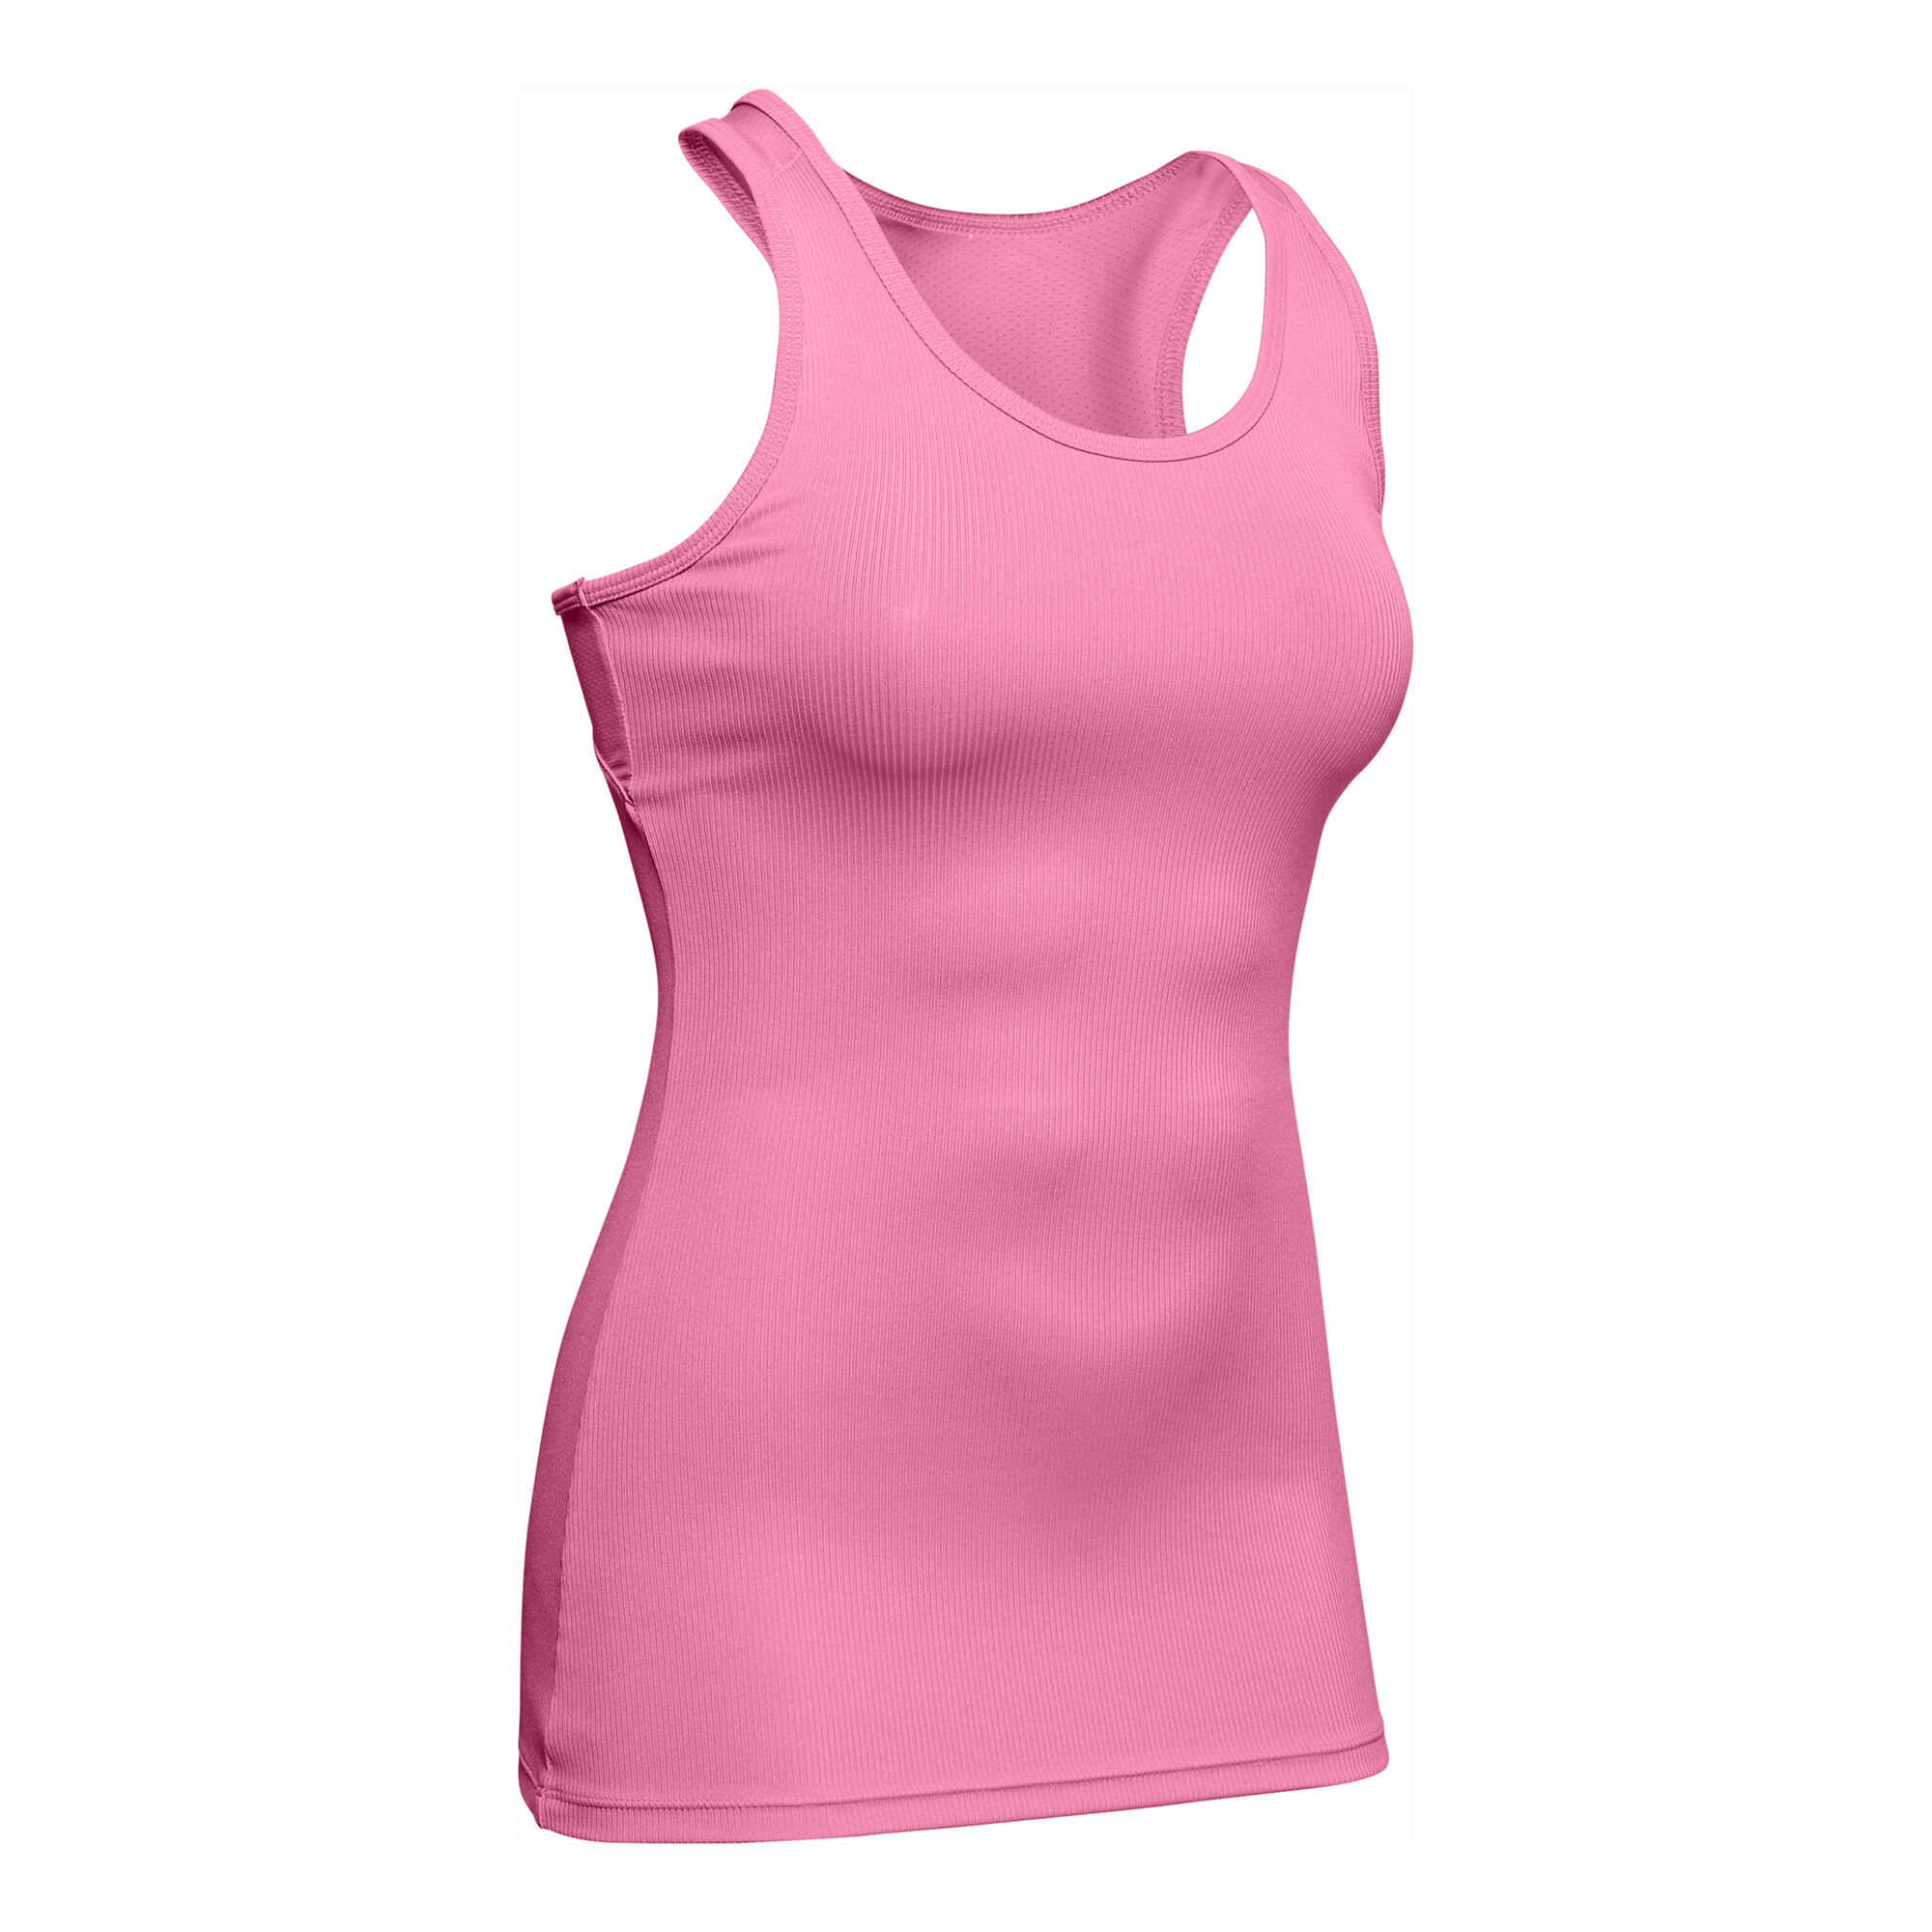 buy Under Armour Victory Tank Top Women - Pink, Silver online | Tennis ...